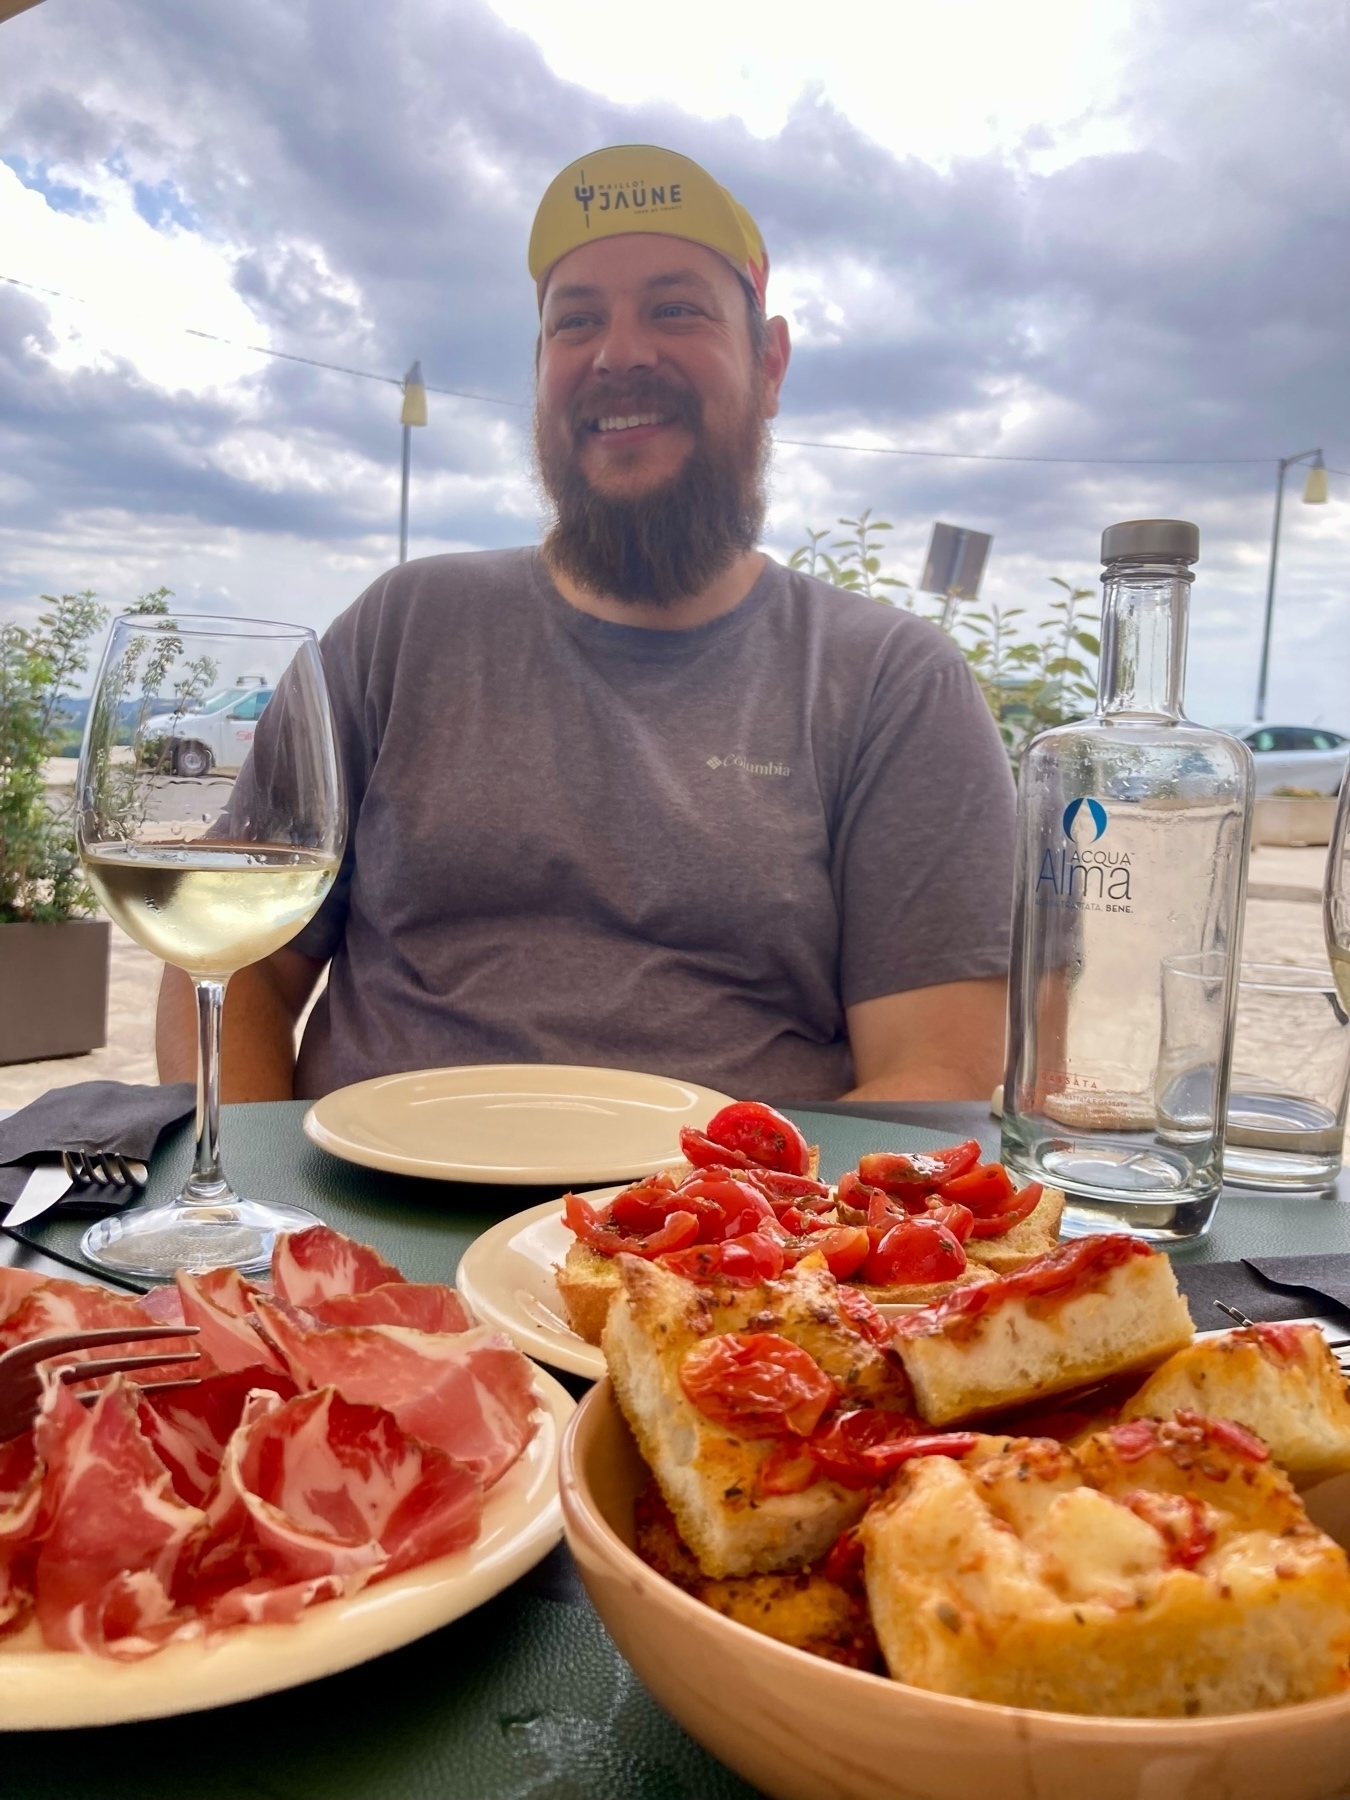 A man with a beard and a yellow cap sits at an outdoor table. In front of him are a glass of white wine, a plate of sliced cured meat, and a bowl of bread topped with cherry tomatoes. 